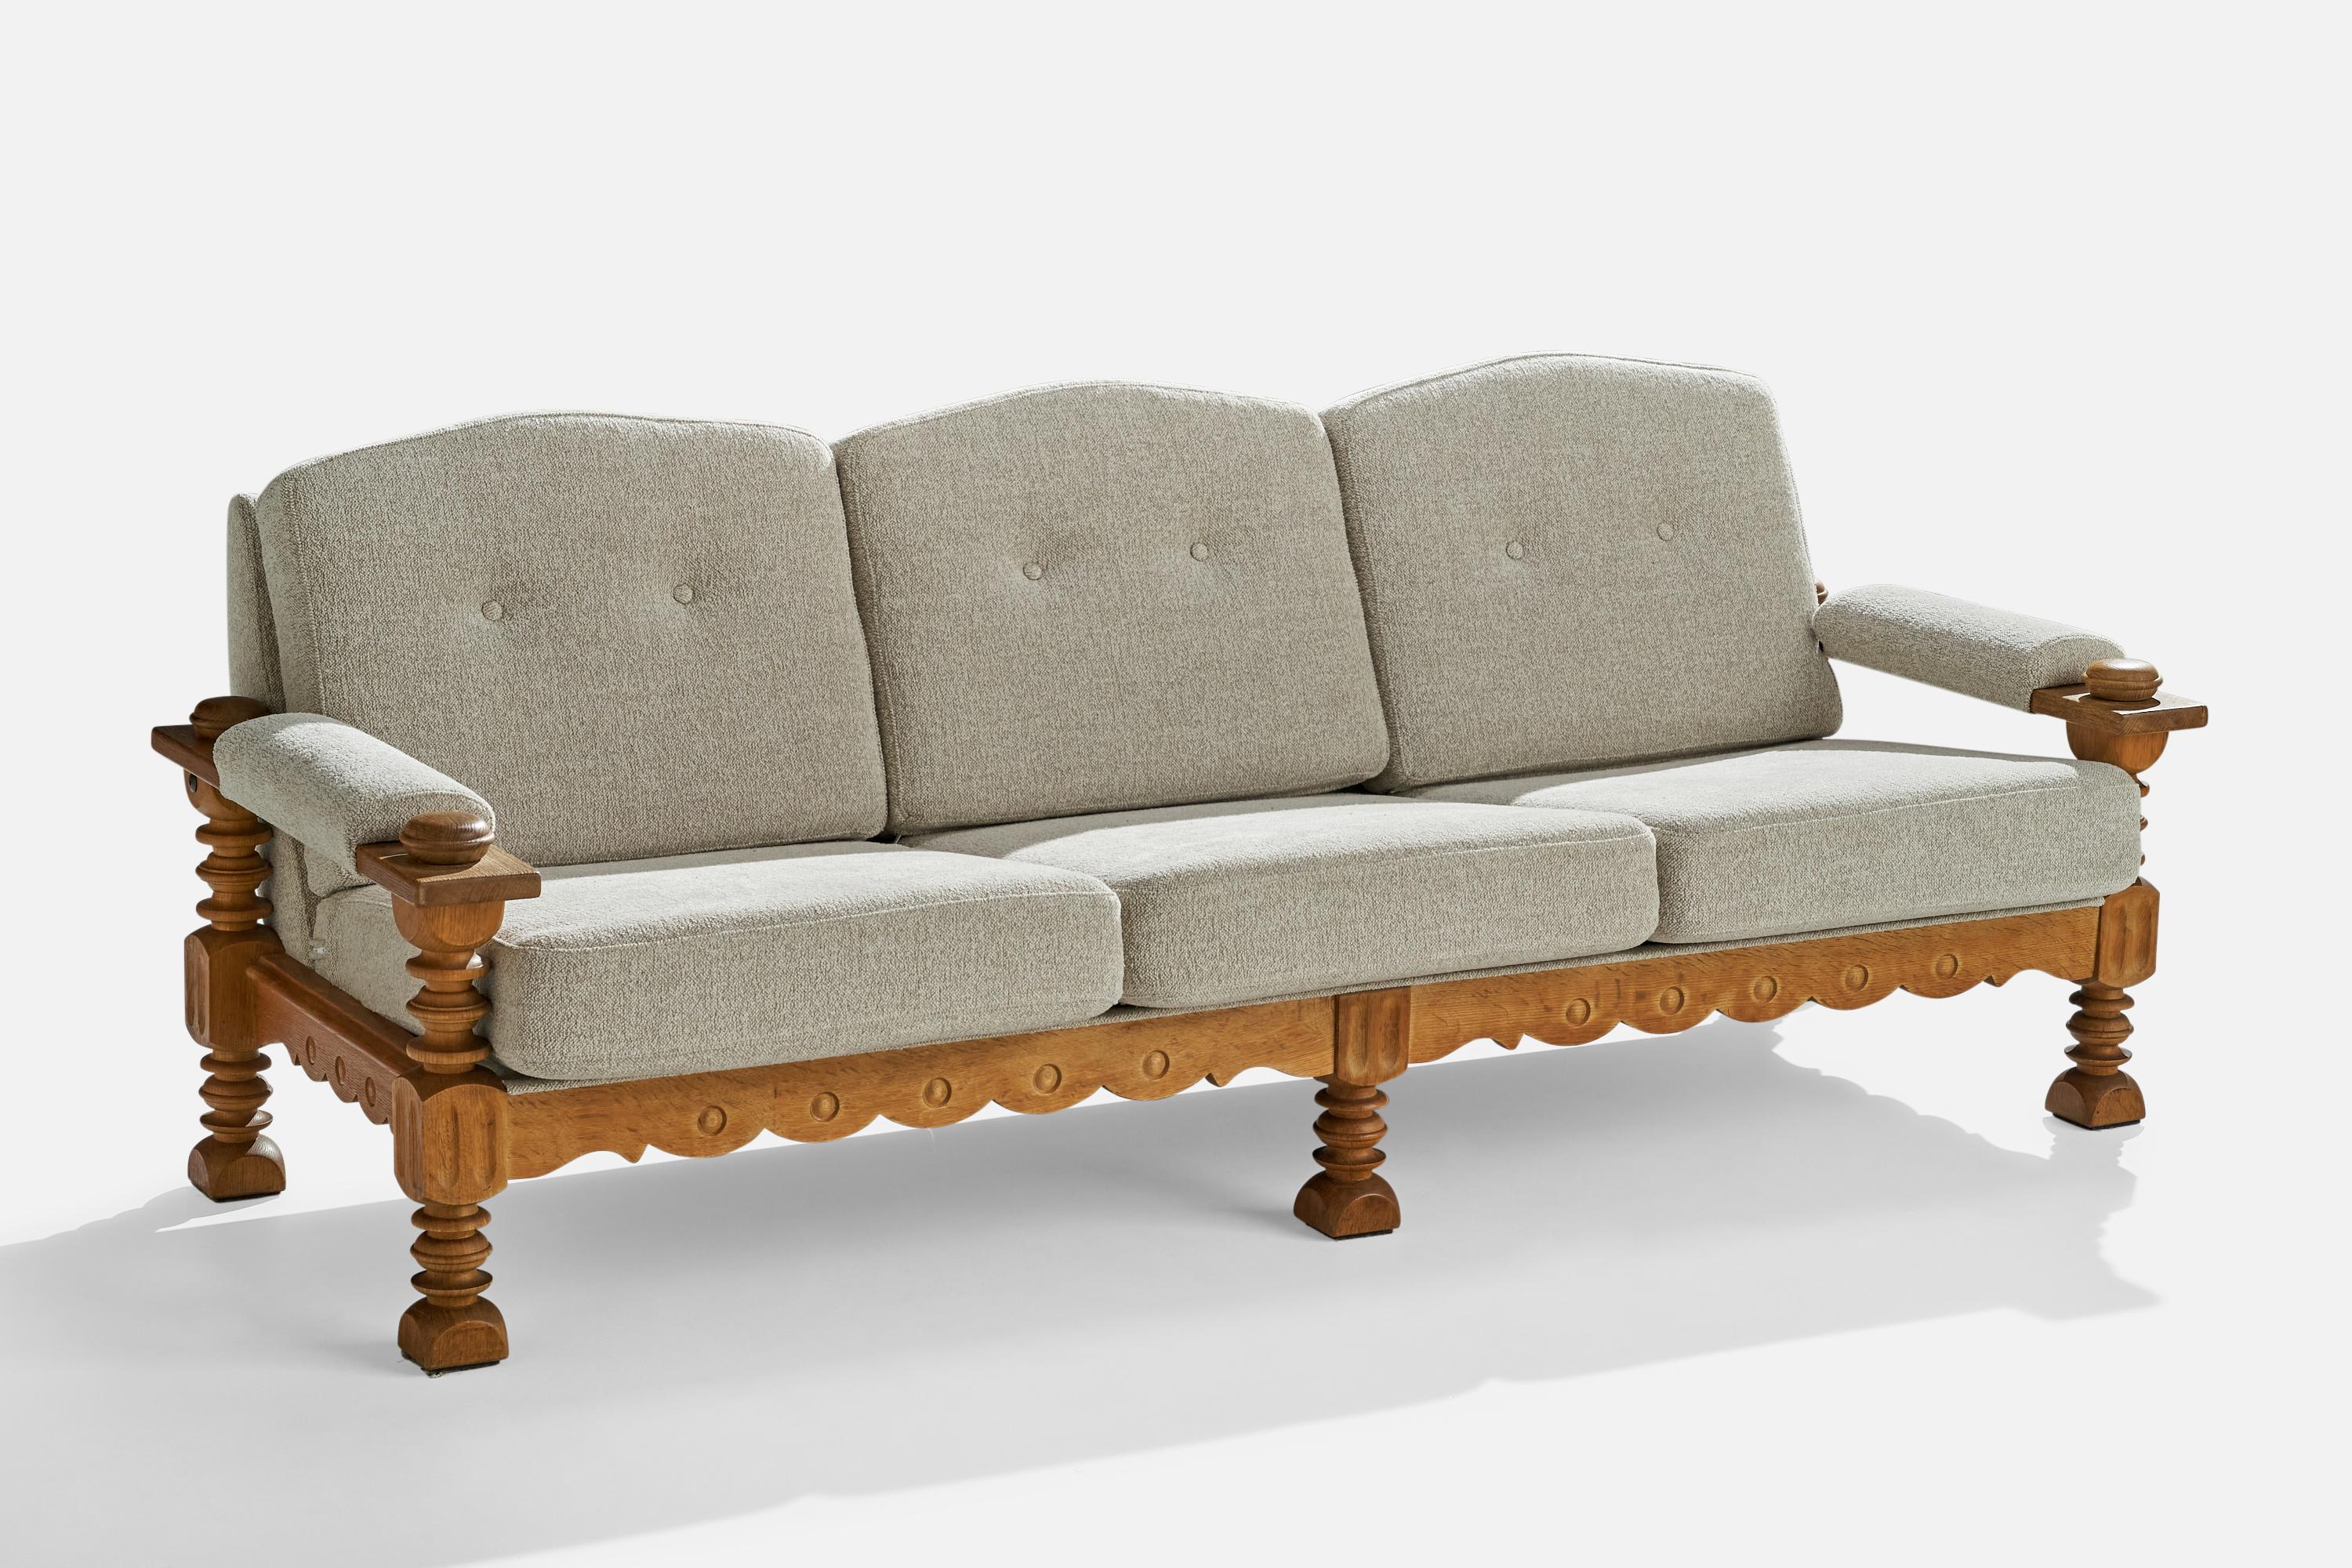 A carved oak and light grey fabric sofa designed and produced in Denmark, c. 1960s.

Seat height 16.5”